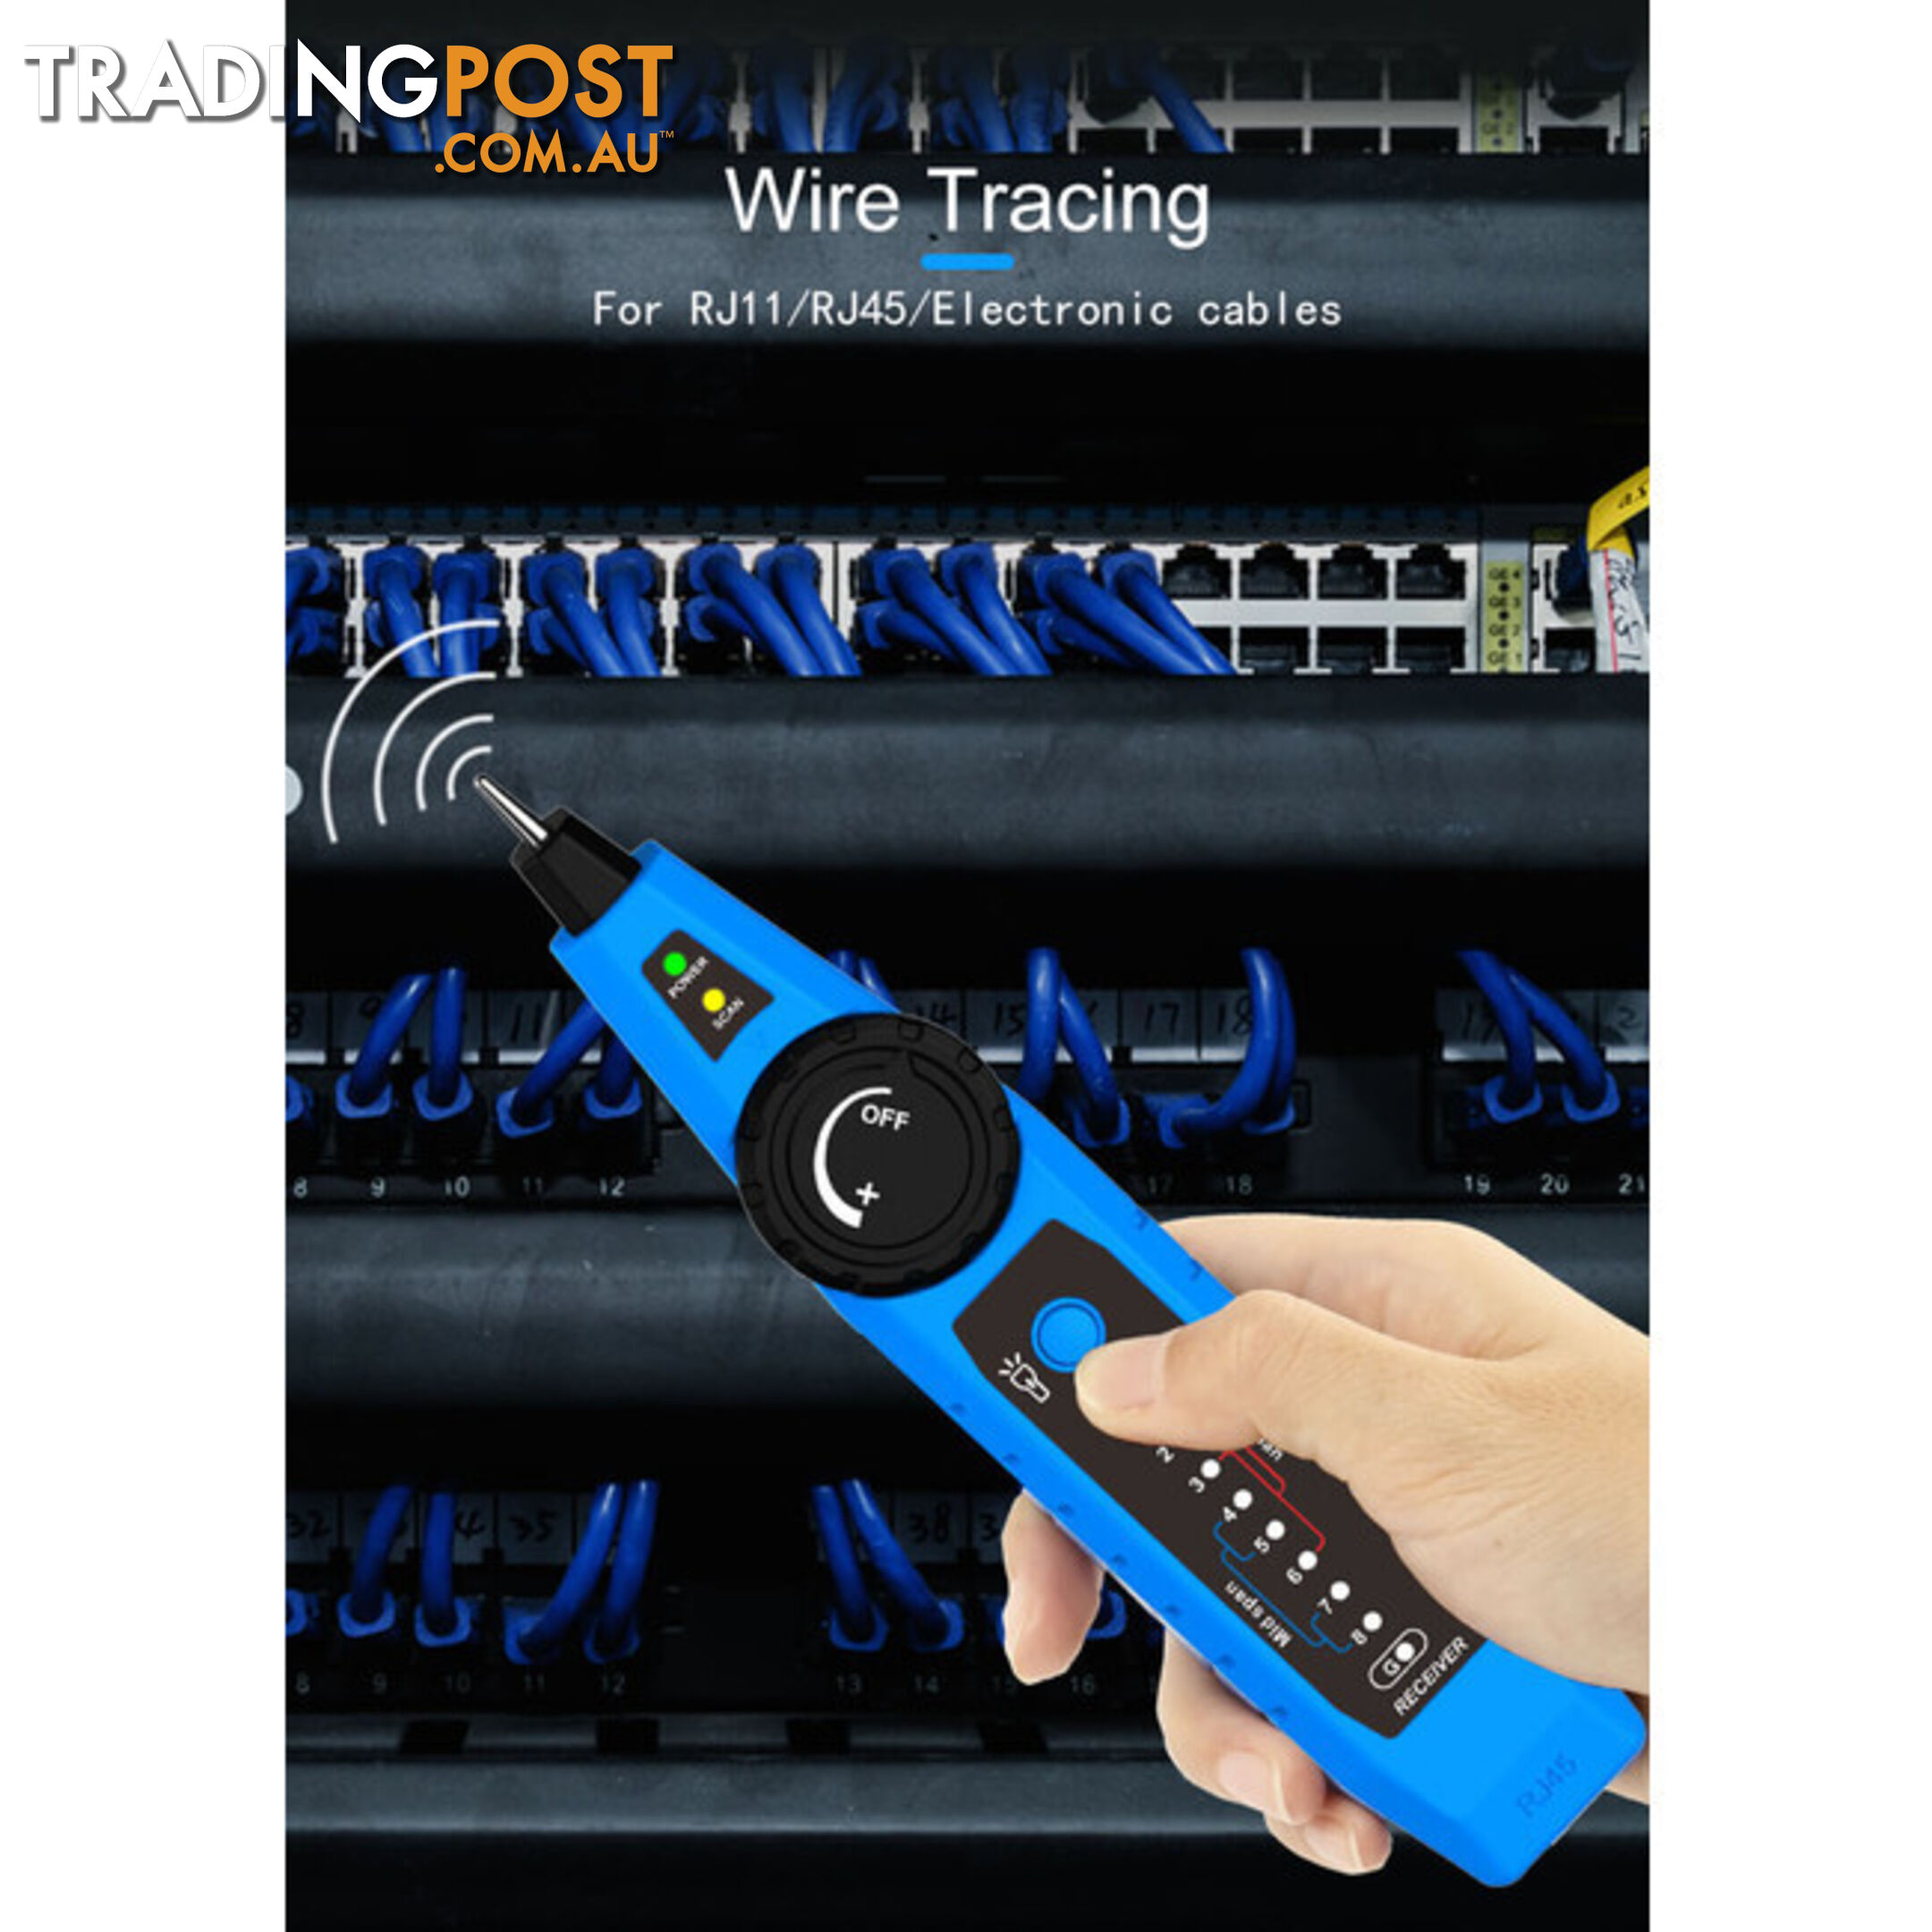 NF810 MULTIFUNCTION CABLE DETECTOR CABLE TRACER LAN TESTER BLUE